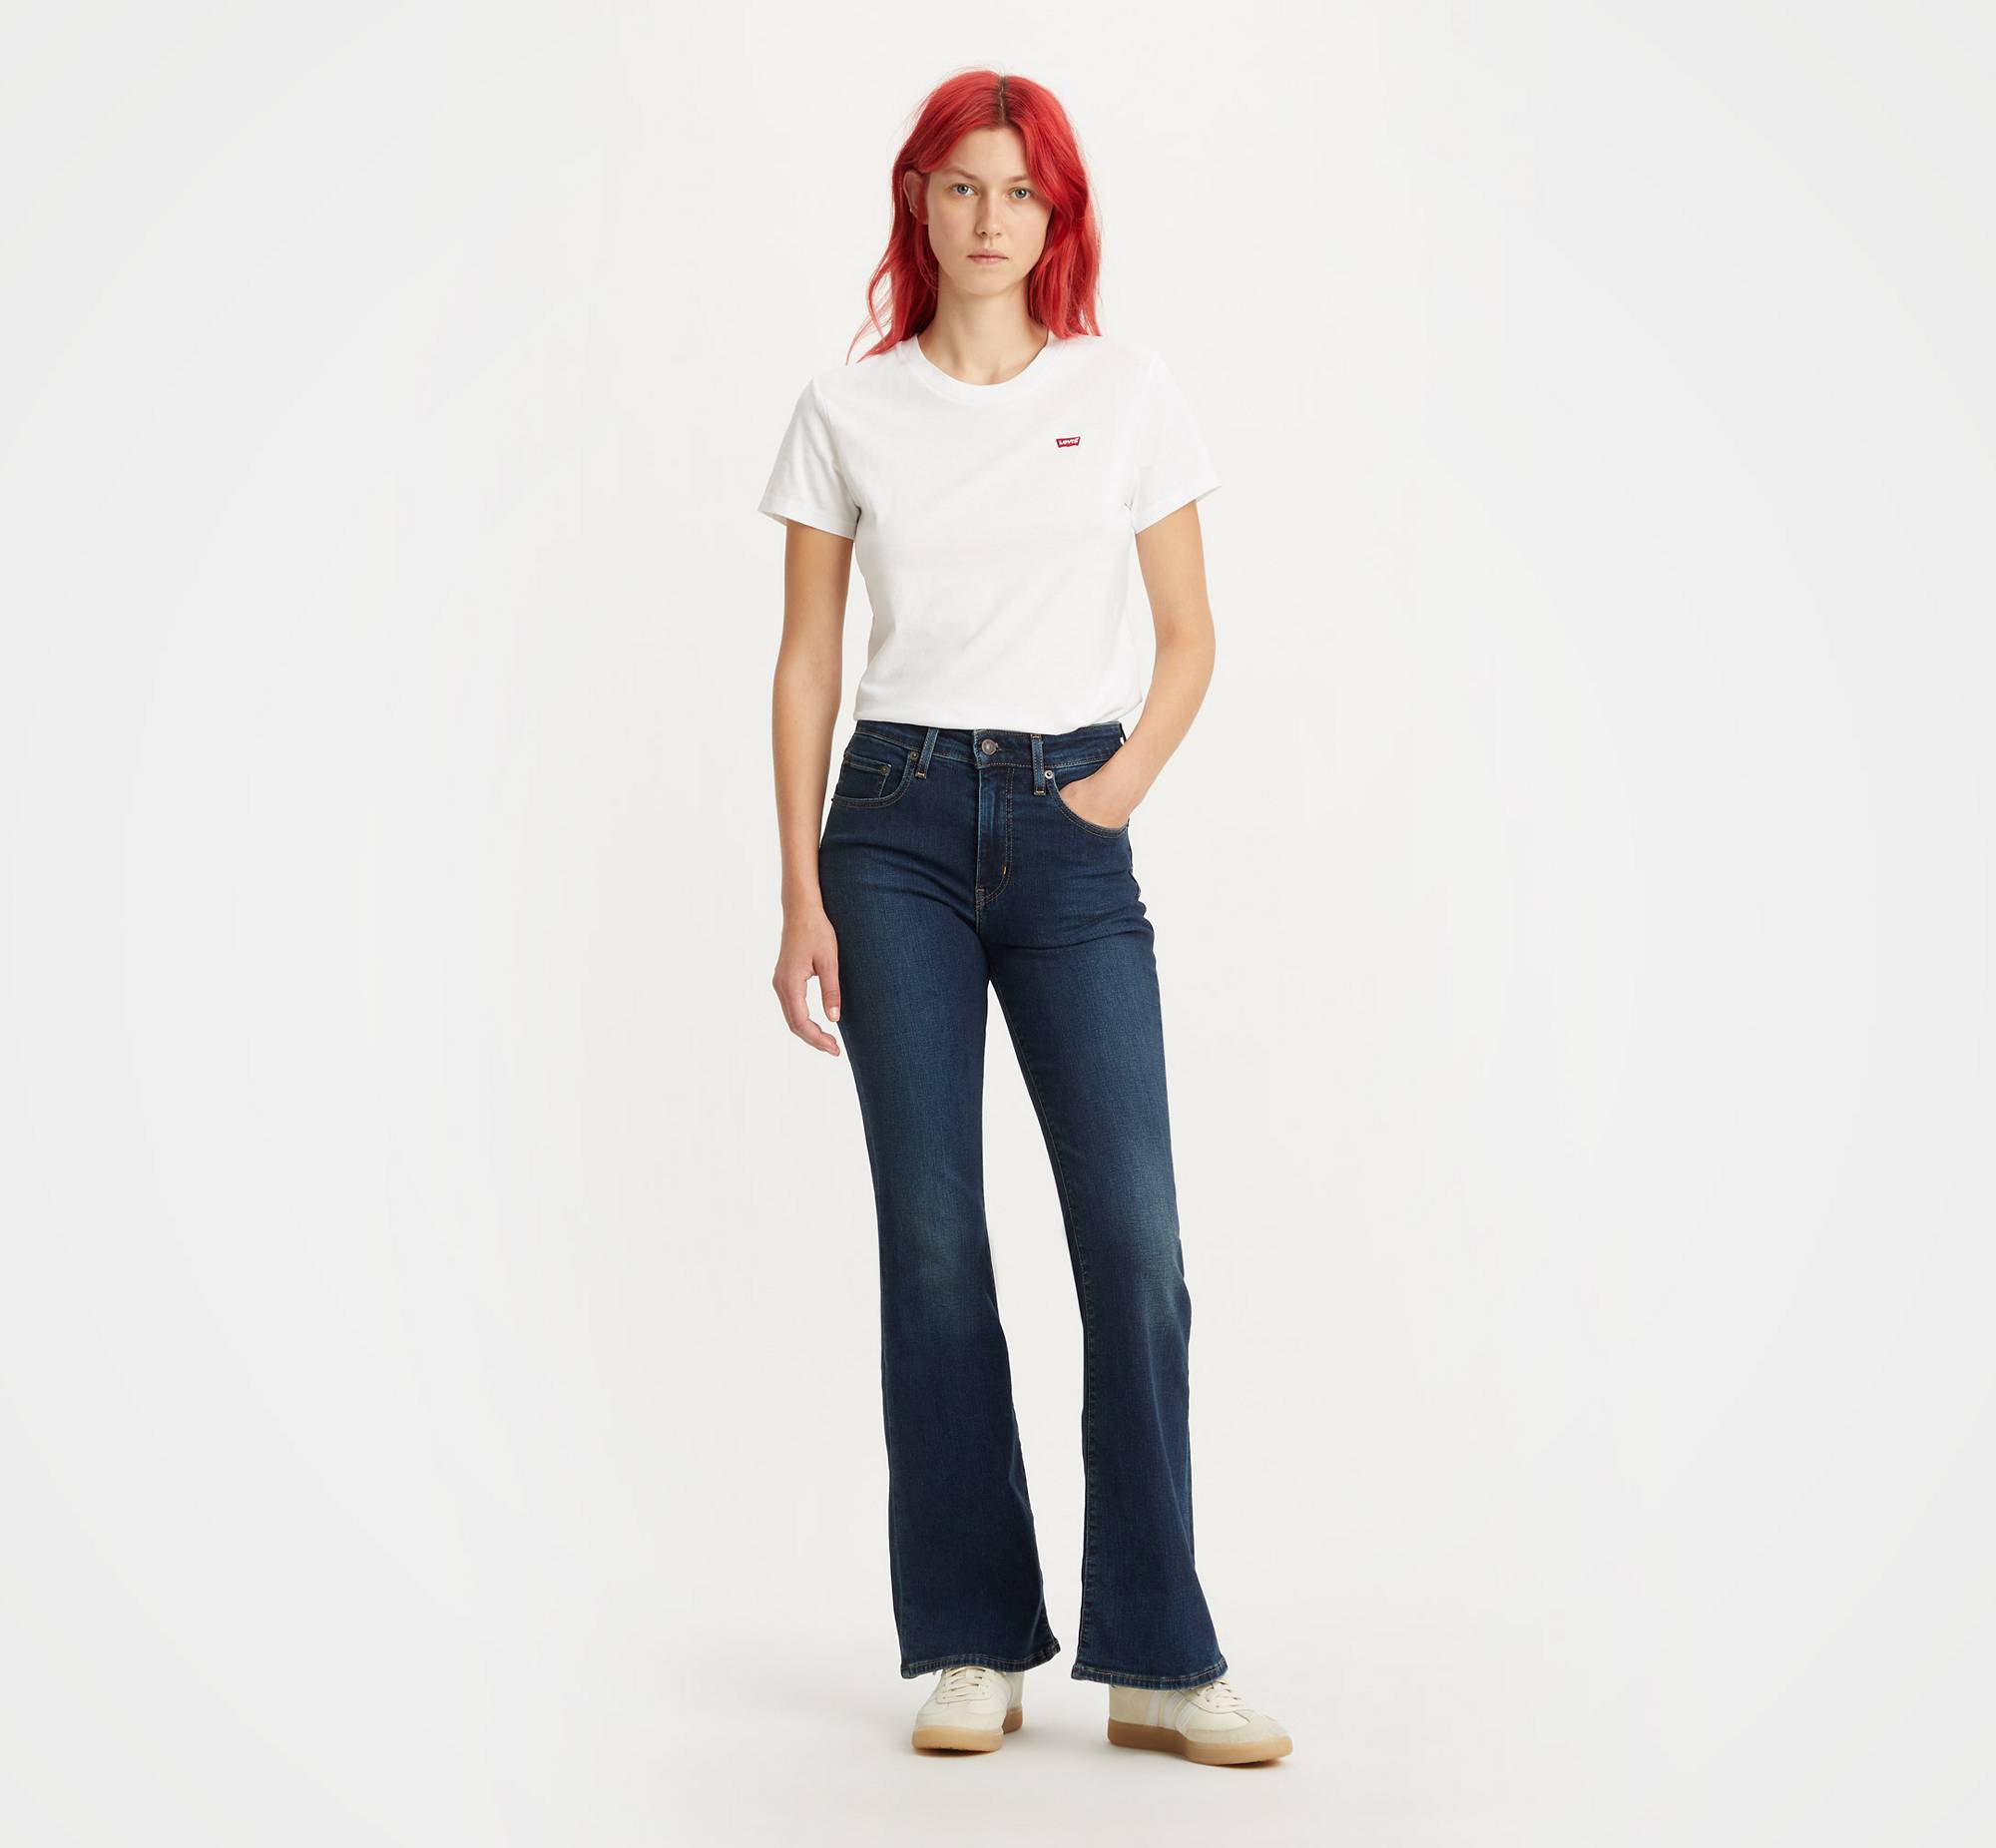 726™ High Rise Flare Jeans 7